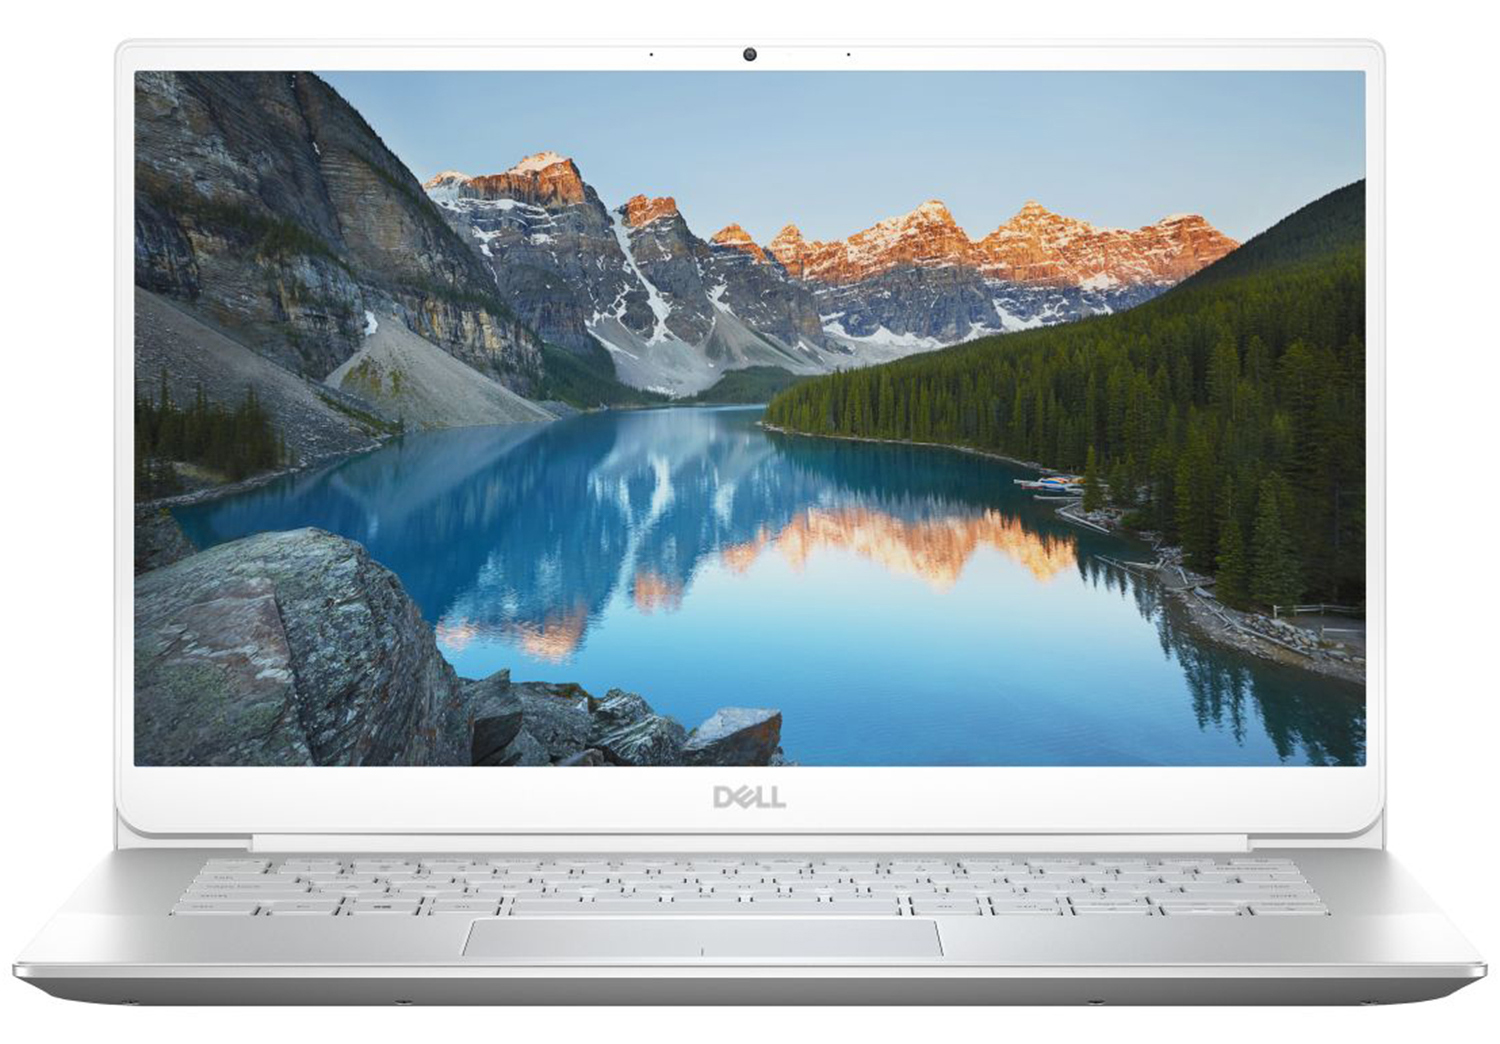 Dell Inspiron 14 5490 review - two workdays on a single battery 